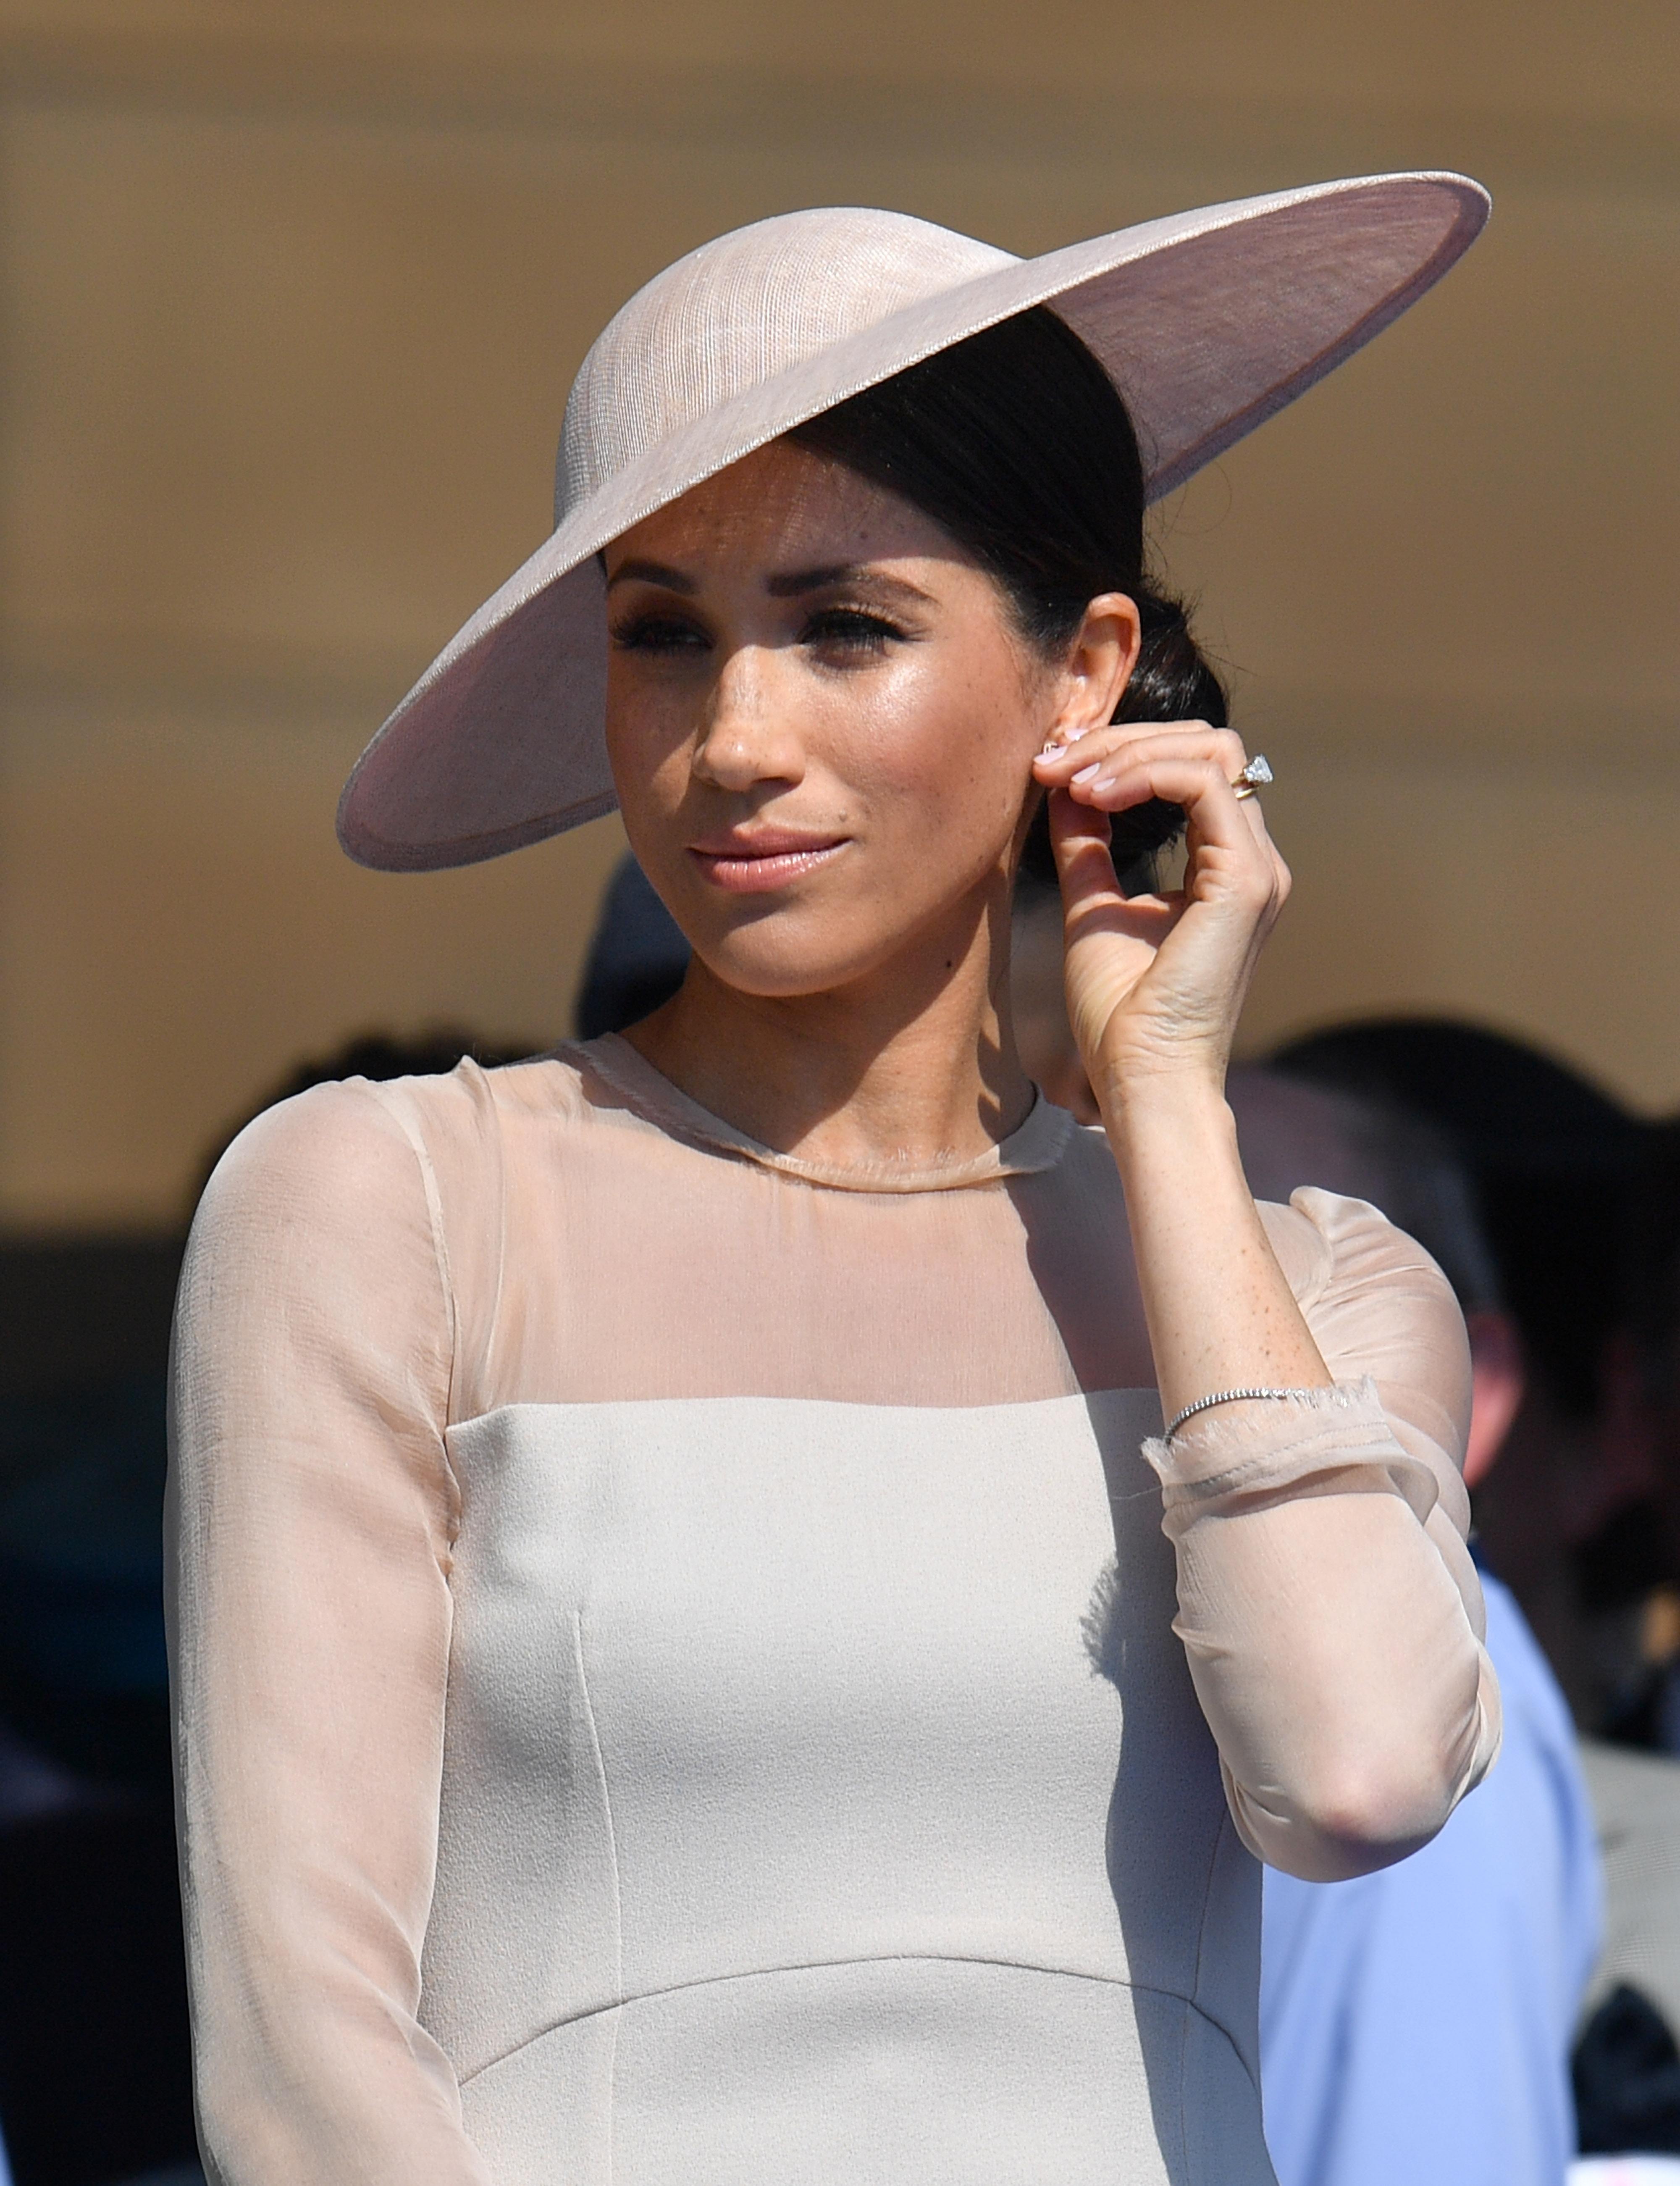 The Duchess of Sussex at a garden party at Buckingham Palace in London which she is attending as her first royal engagement after being married. The garden party was to mark the forthcoming 70th birthday of The Prince of Wales.